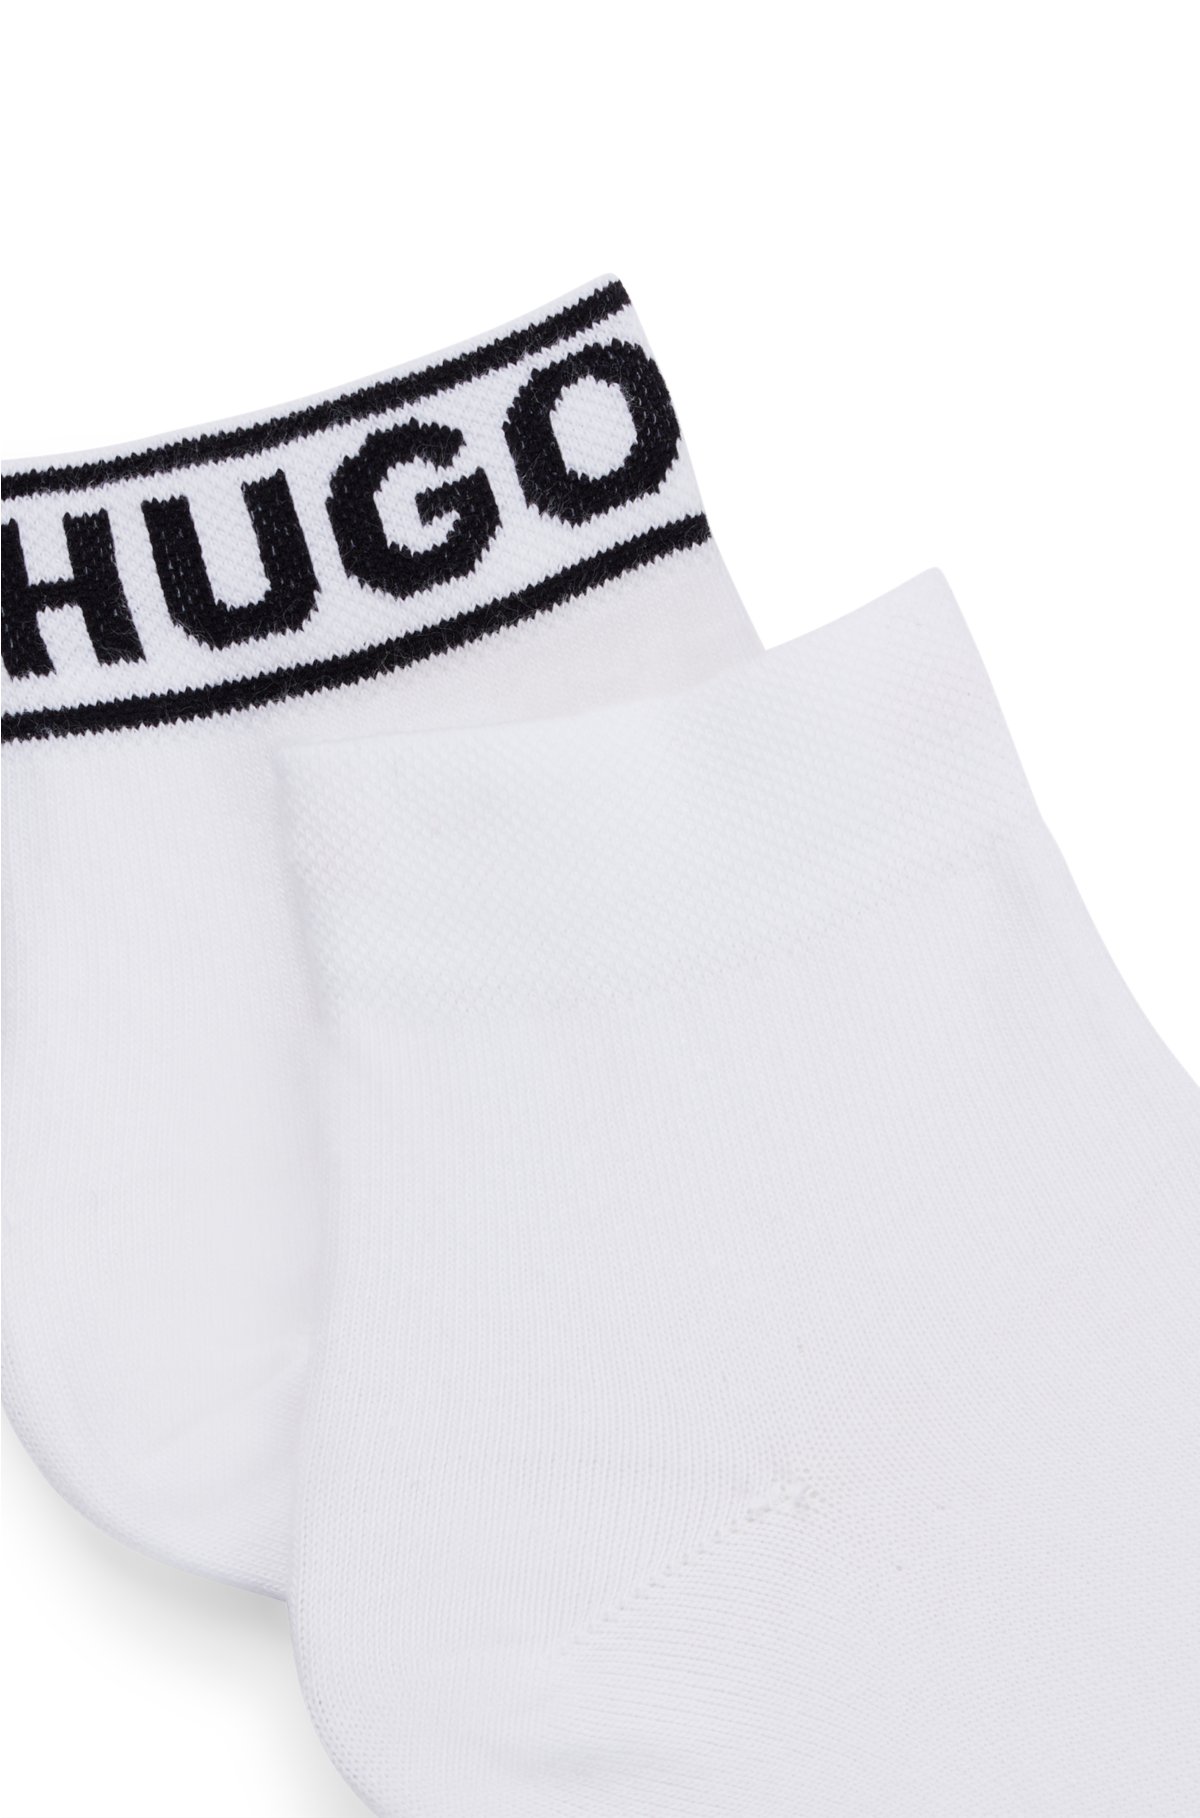 Two-pack of quarter-length socks with logo cuffs, White